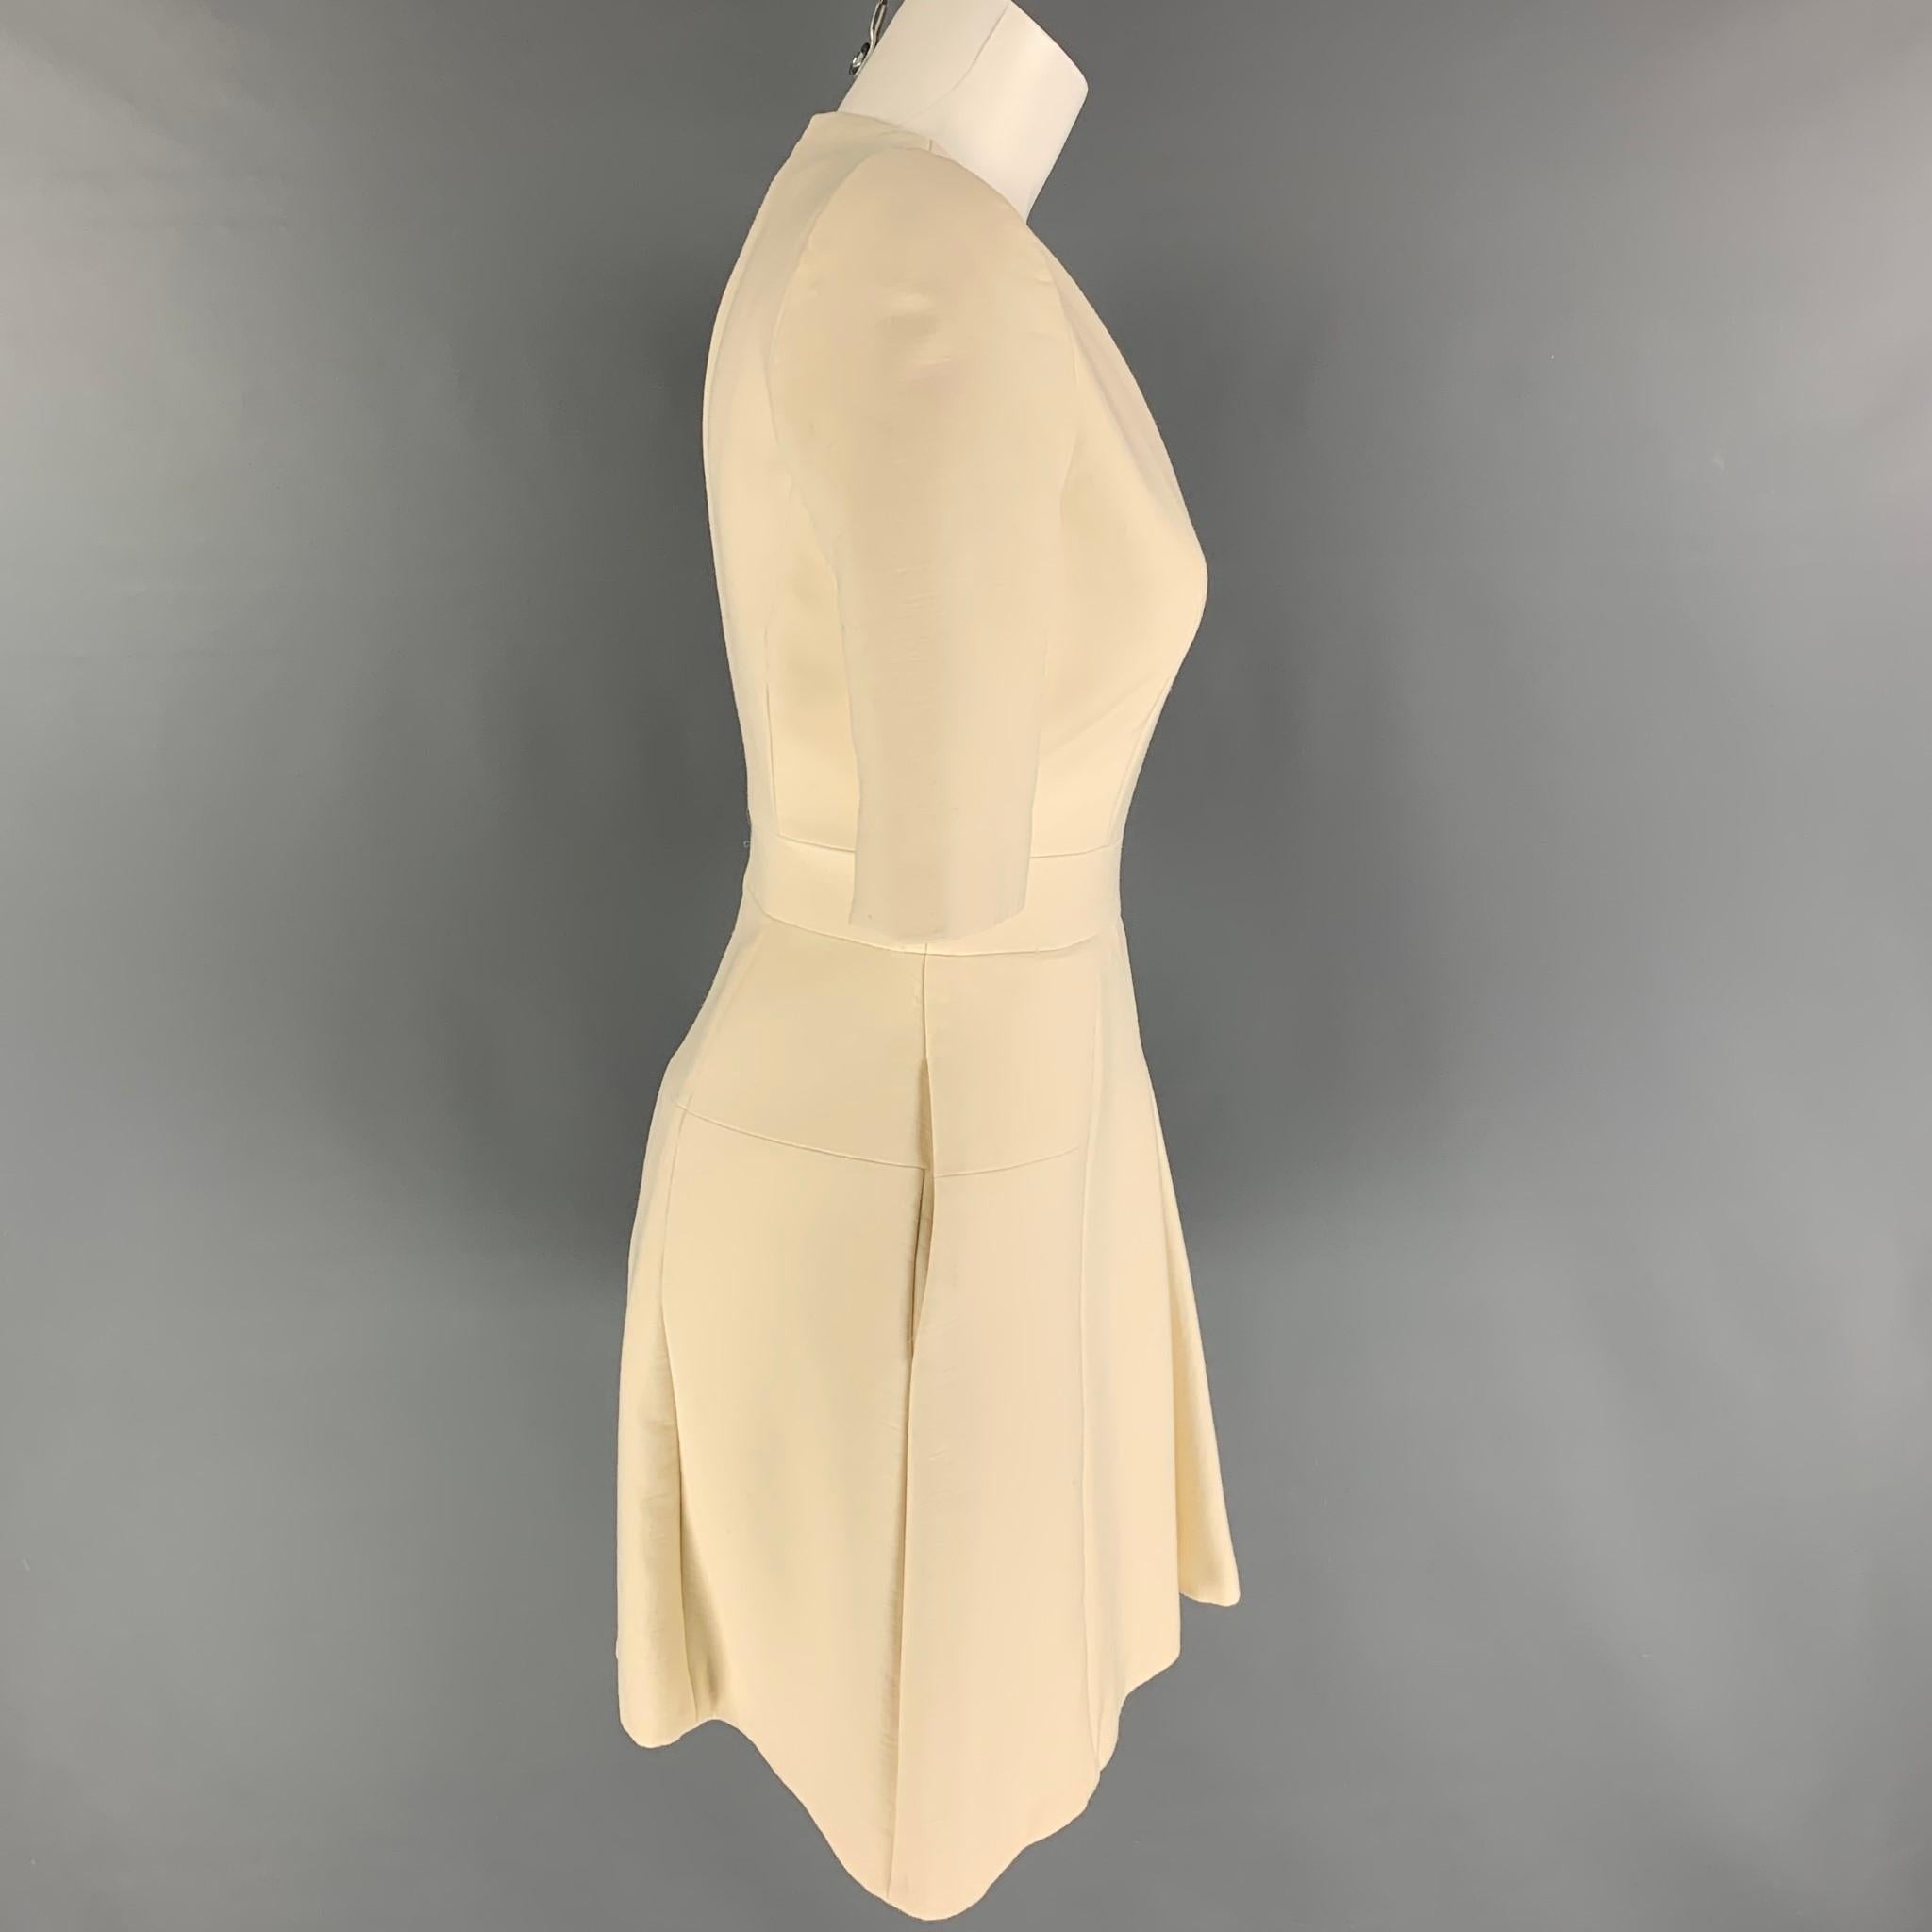 ALEXANDER McQUEEN dress comes in a cream wool blend featuring a v-neck, pleated, short sleeves, and a back zip up closure. Made in Italy. 

Very Good Pre-Owned Condition.
Marked: 40

Measurements:

Shoulder: 15 in.
Bust: 33 in.
Waist: 36 in.
Hip: 36